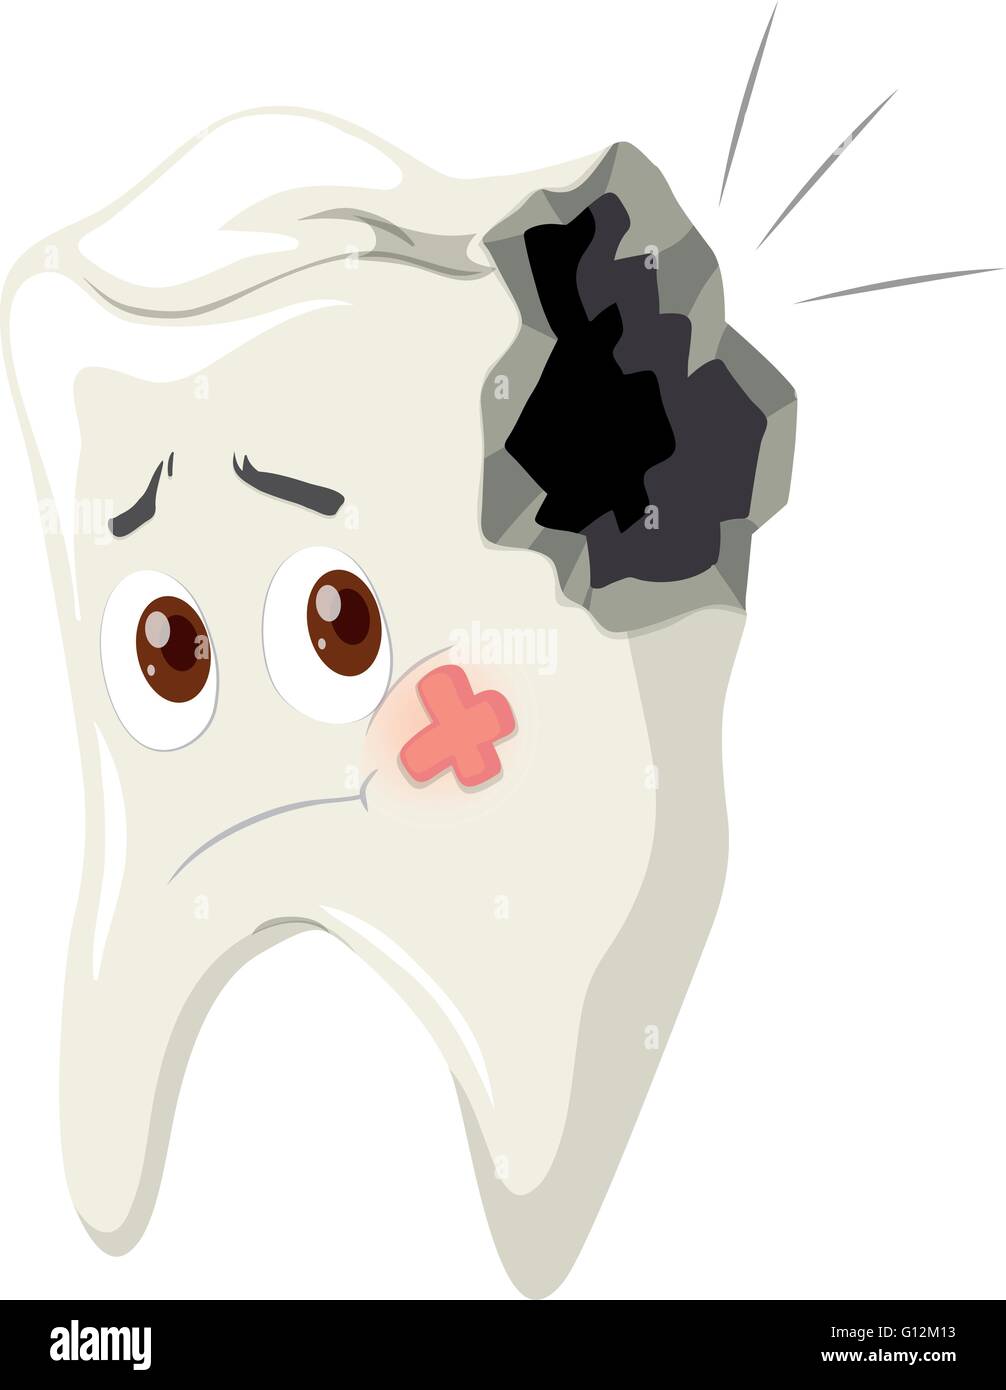 Tooth decay with sad face illustration Stock Vector